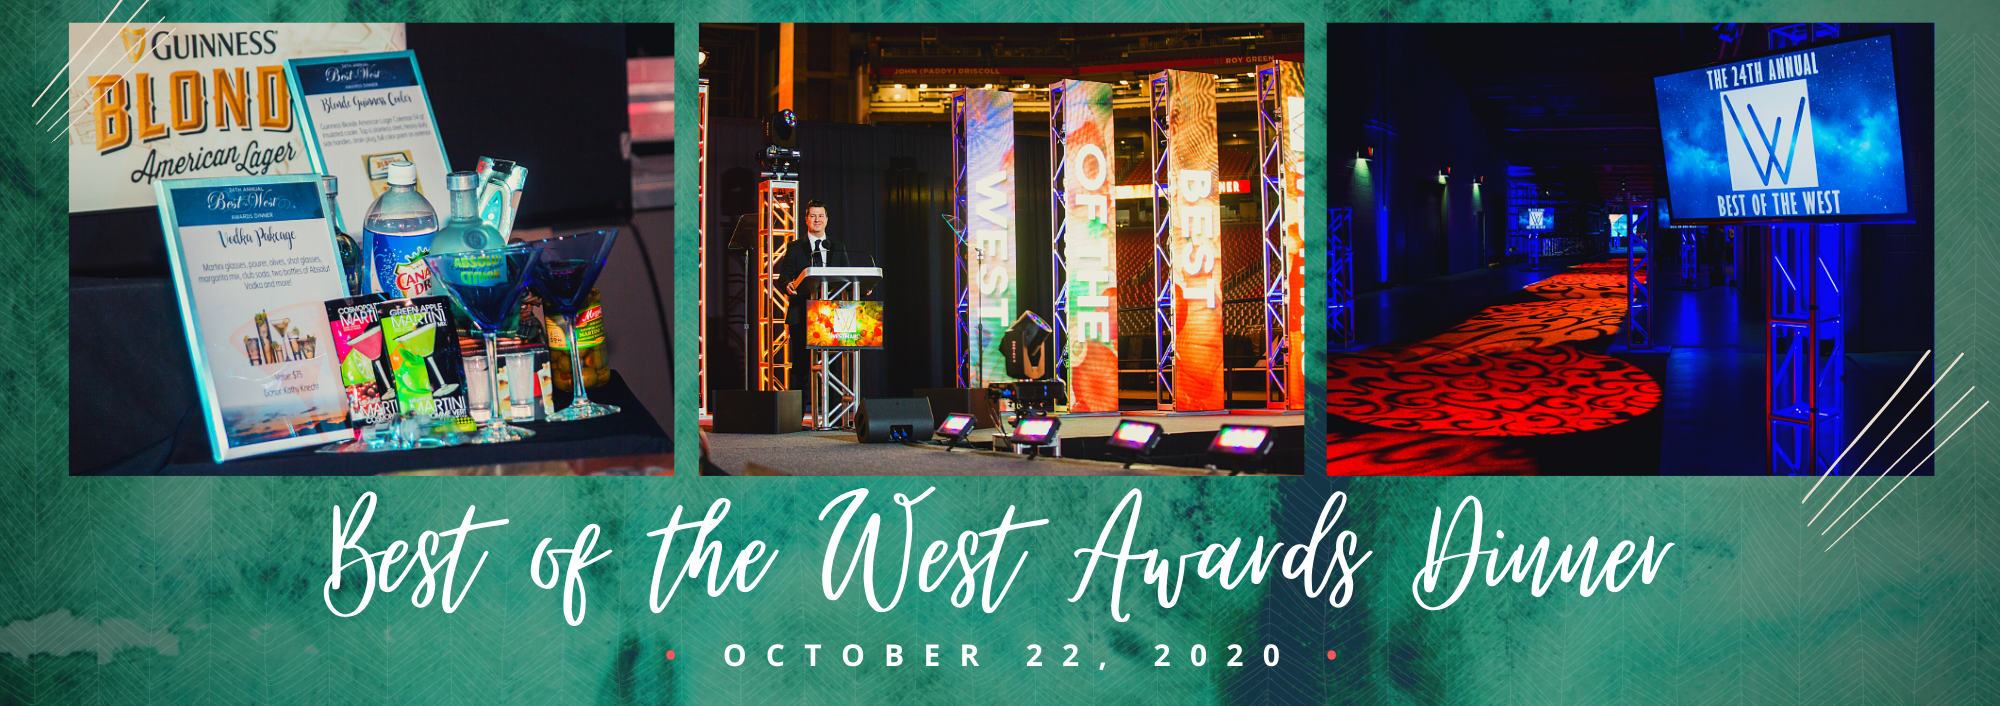 Best of the West Awards Dinner honors people, projects and programs that move the West Valley forward!  Join us for this outdoor dining and entertainment evening under the stars at Phoenix Raceway in Avondale on October 22nd!